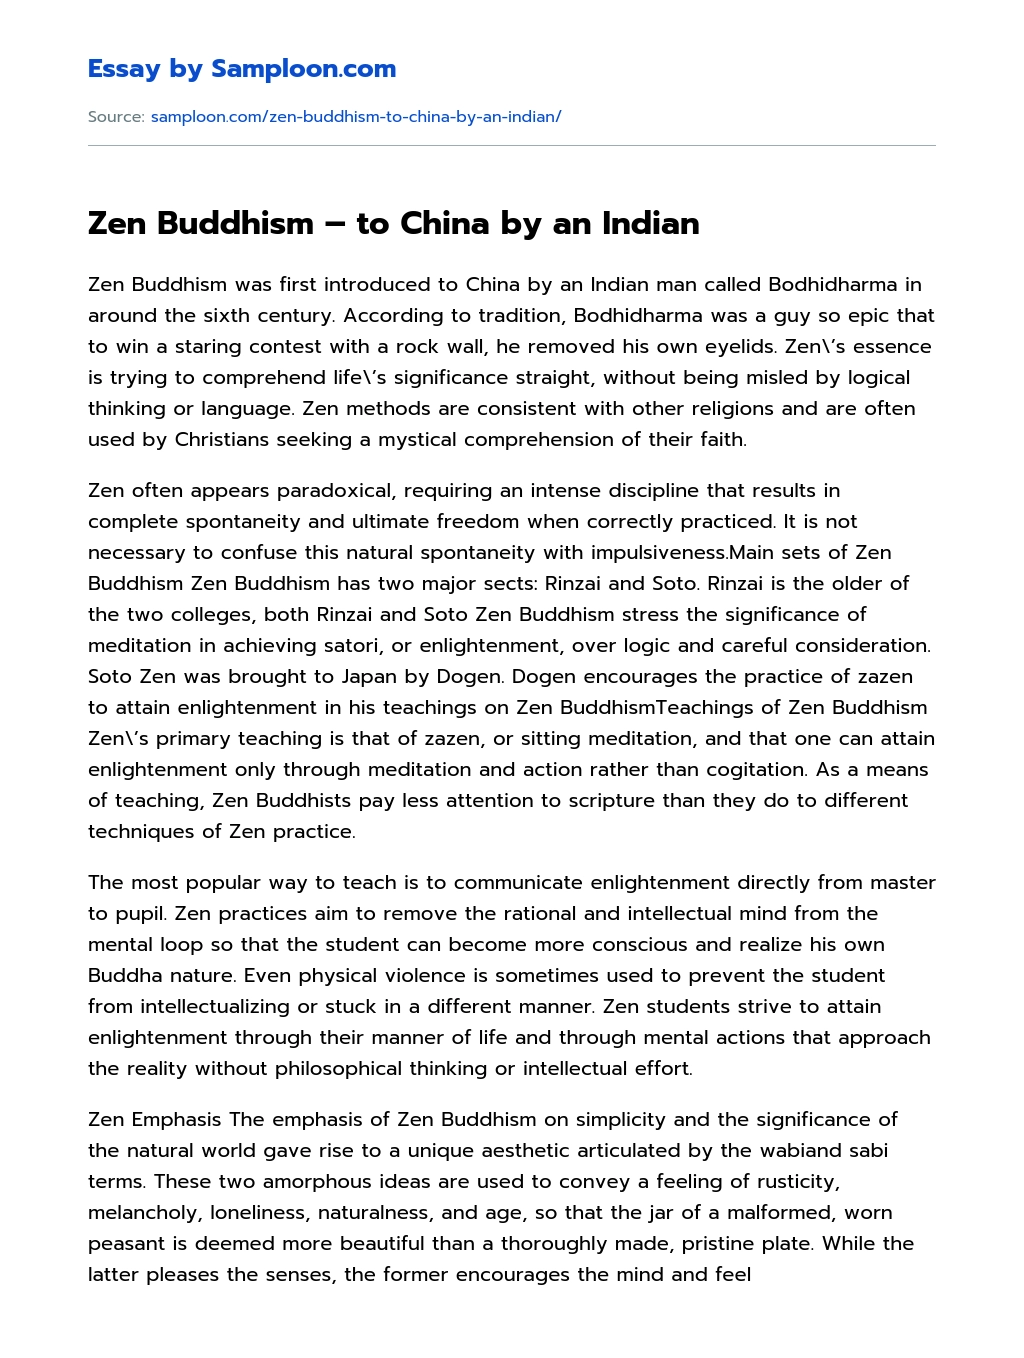 Zen Buddhism – to China by an Indian essay